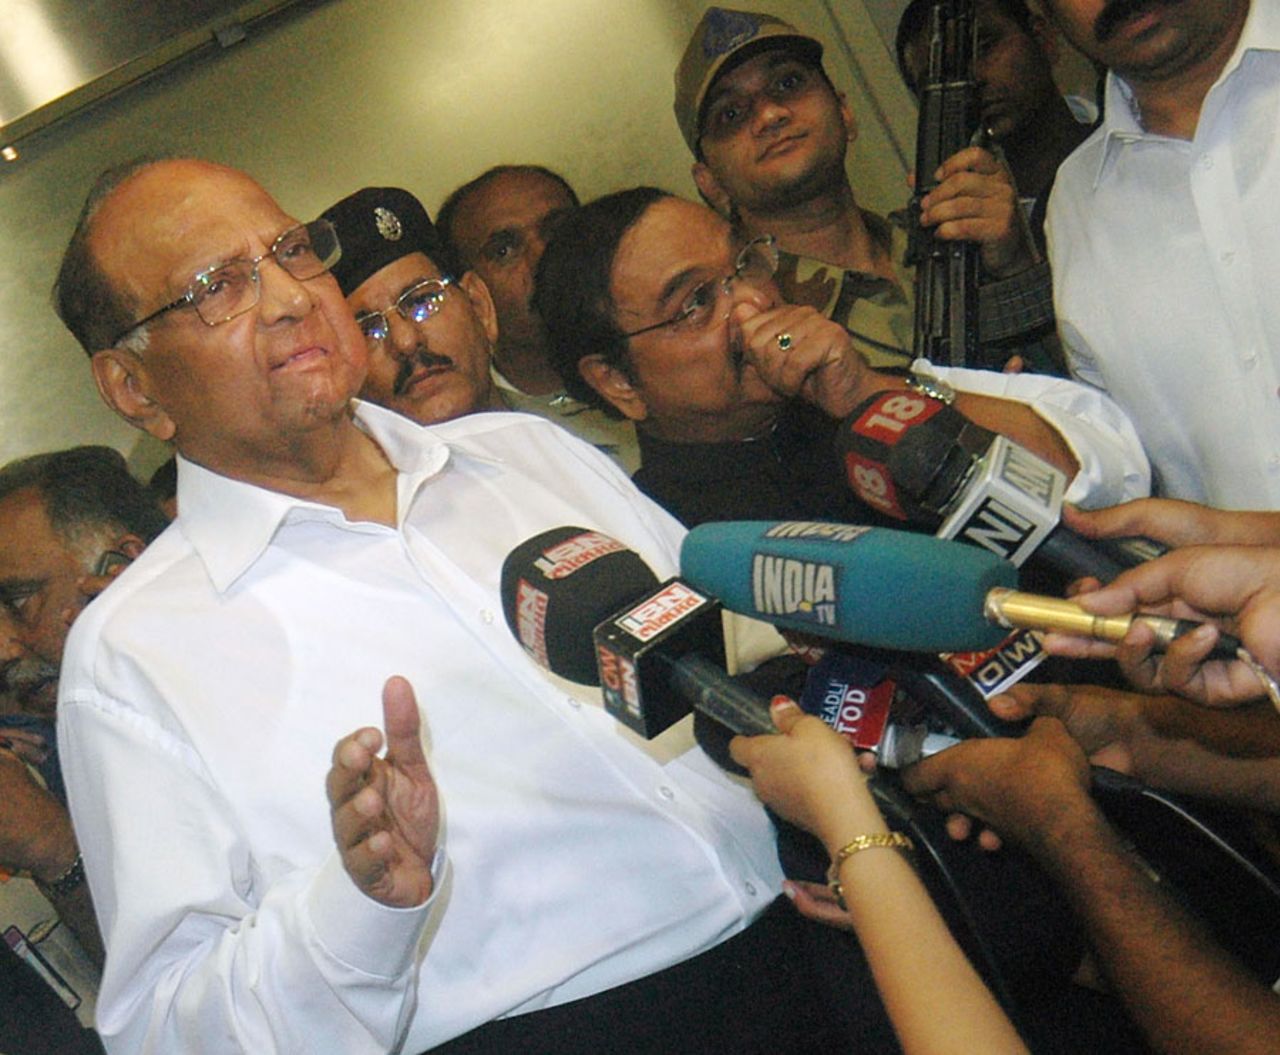 Sharad Pawar fields questions from the media after returning to India following his appointment as ICC chief, July 2, 2010